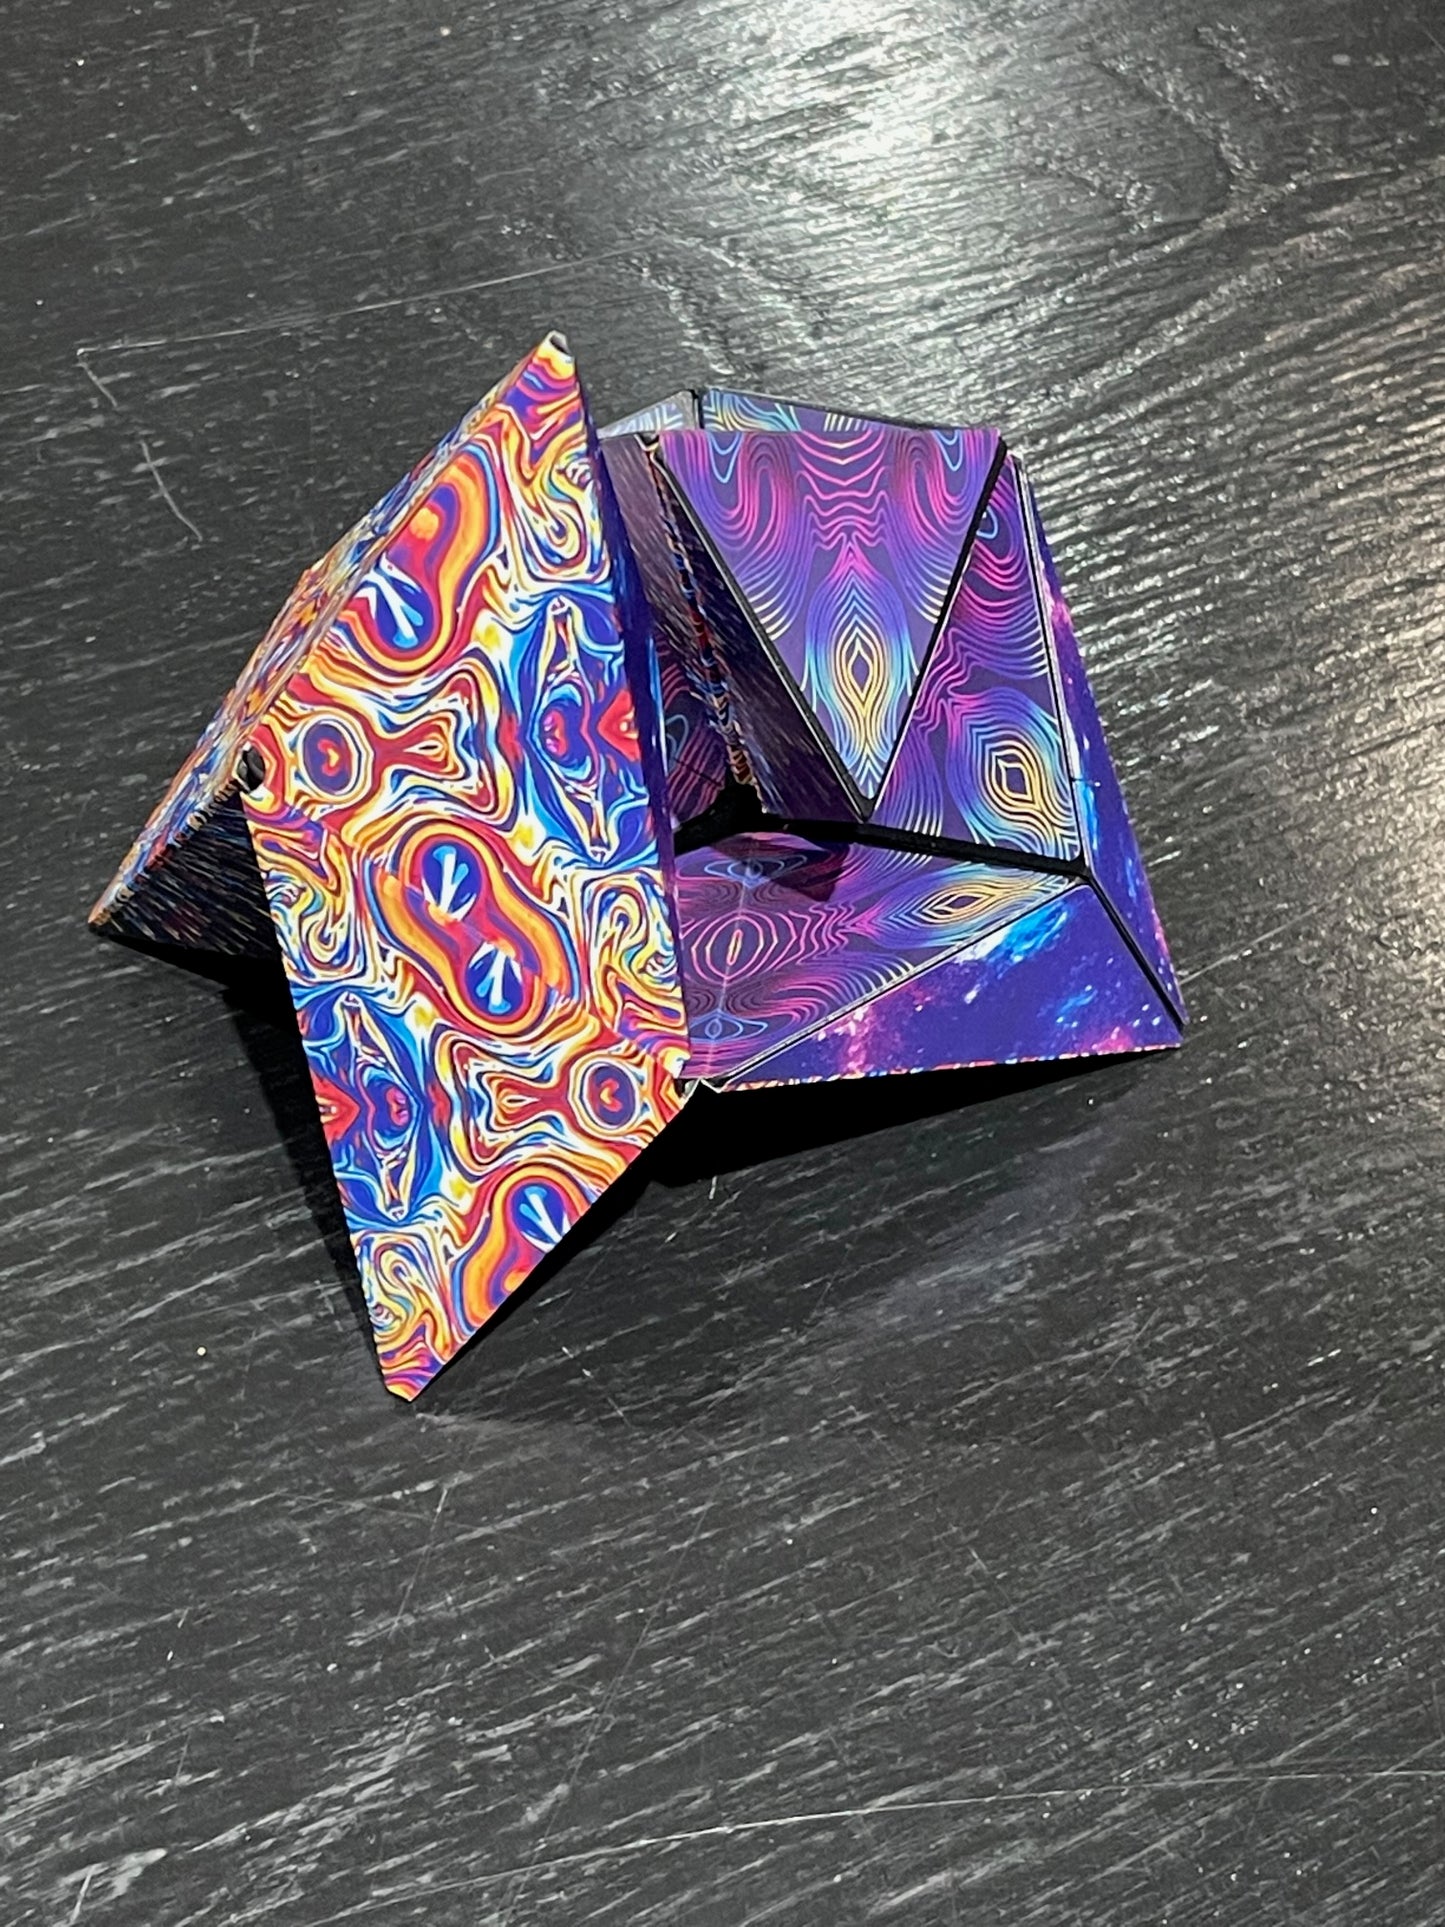 Conundrum House - Kaleidoscope pattern inside out. One of the over 70 shapes that the Unfolding Magnetic Magic Cube can be shaped into.